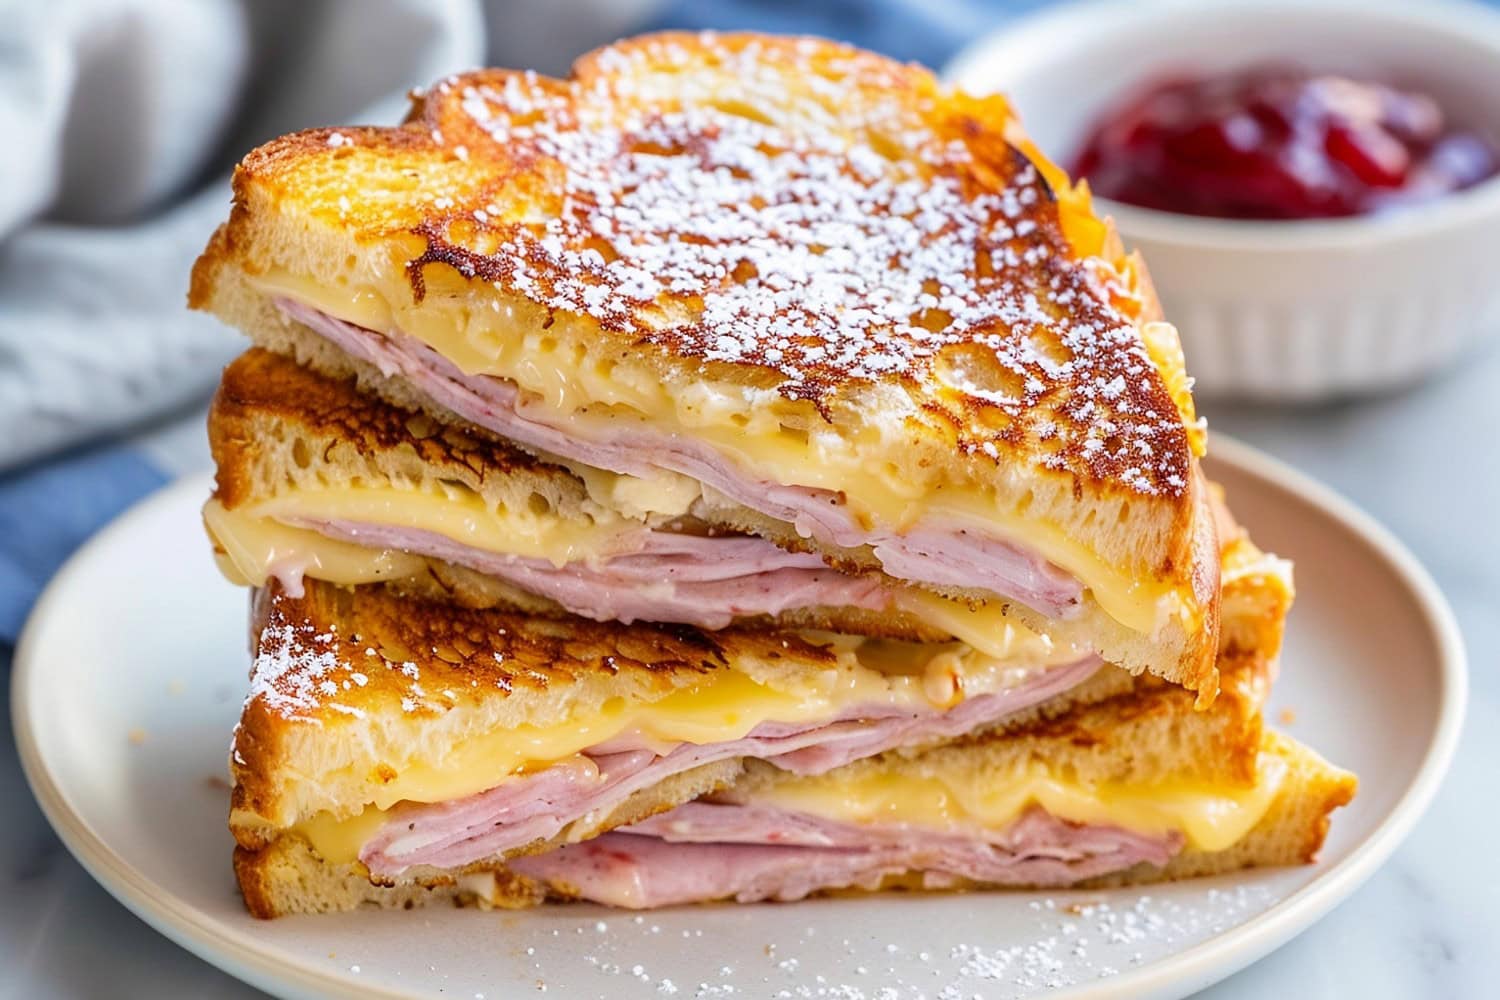 Mouthwatering Monte Cristo sandwich, featuring layers of ham, turkey, and Swiss cheese, sandwiched between slices of buttery French toast